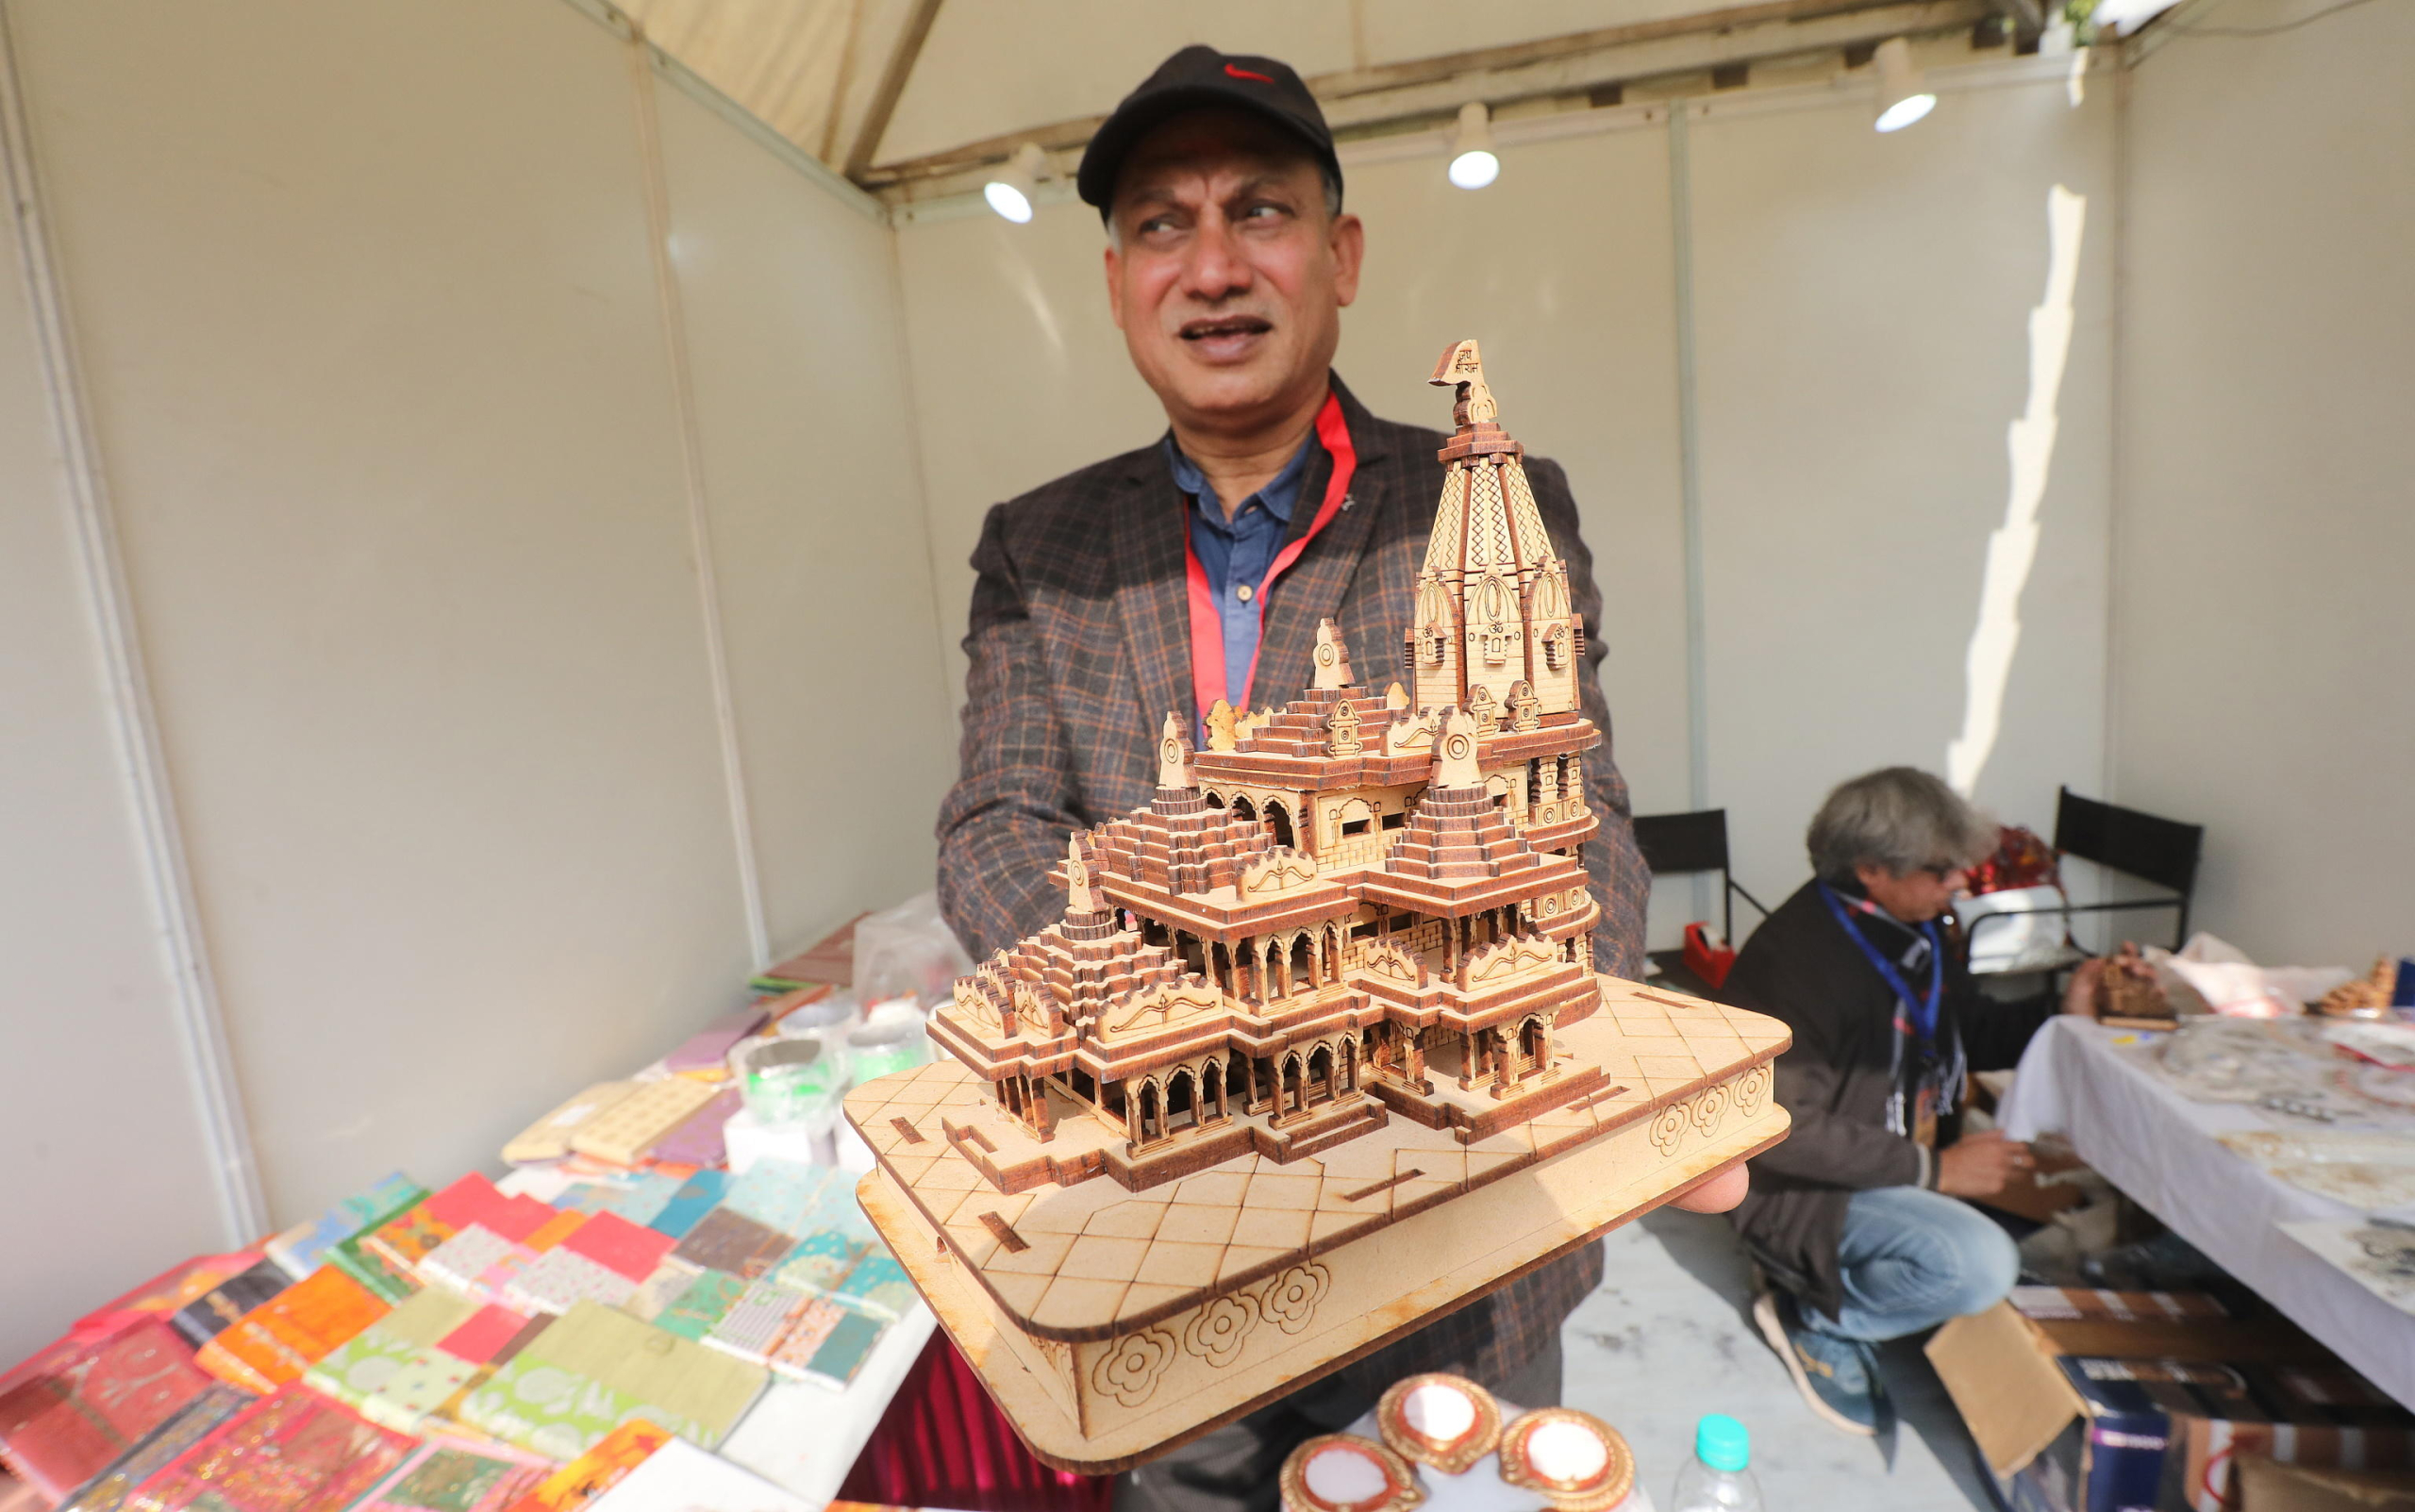 epa11087201 An Indian man holds a model replica of Ayodhya Ram Mandir at the India International Ramayana Festival in New Delhi, India, 18 January 2024. Indian Council of Cultural Relations (ICCR) organized a five-day long festival emphasizing the enduring relevance and universality of the Ramayana ahead of the Pran Pratistha ceremony, or the inauguration ceremony of the Lord Ram temple in Ayodhya, that is scheduled for 22 January 2024. Pran Pratistha is the act which transforms an idol into a deity, giving it the capacity to accept prayers. The Indian prime minister will perform the Pran Pratishtha ceremony on the inauguration day.  EPA/HARISH TYAGI